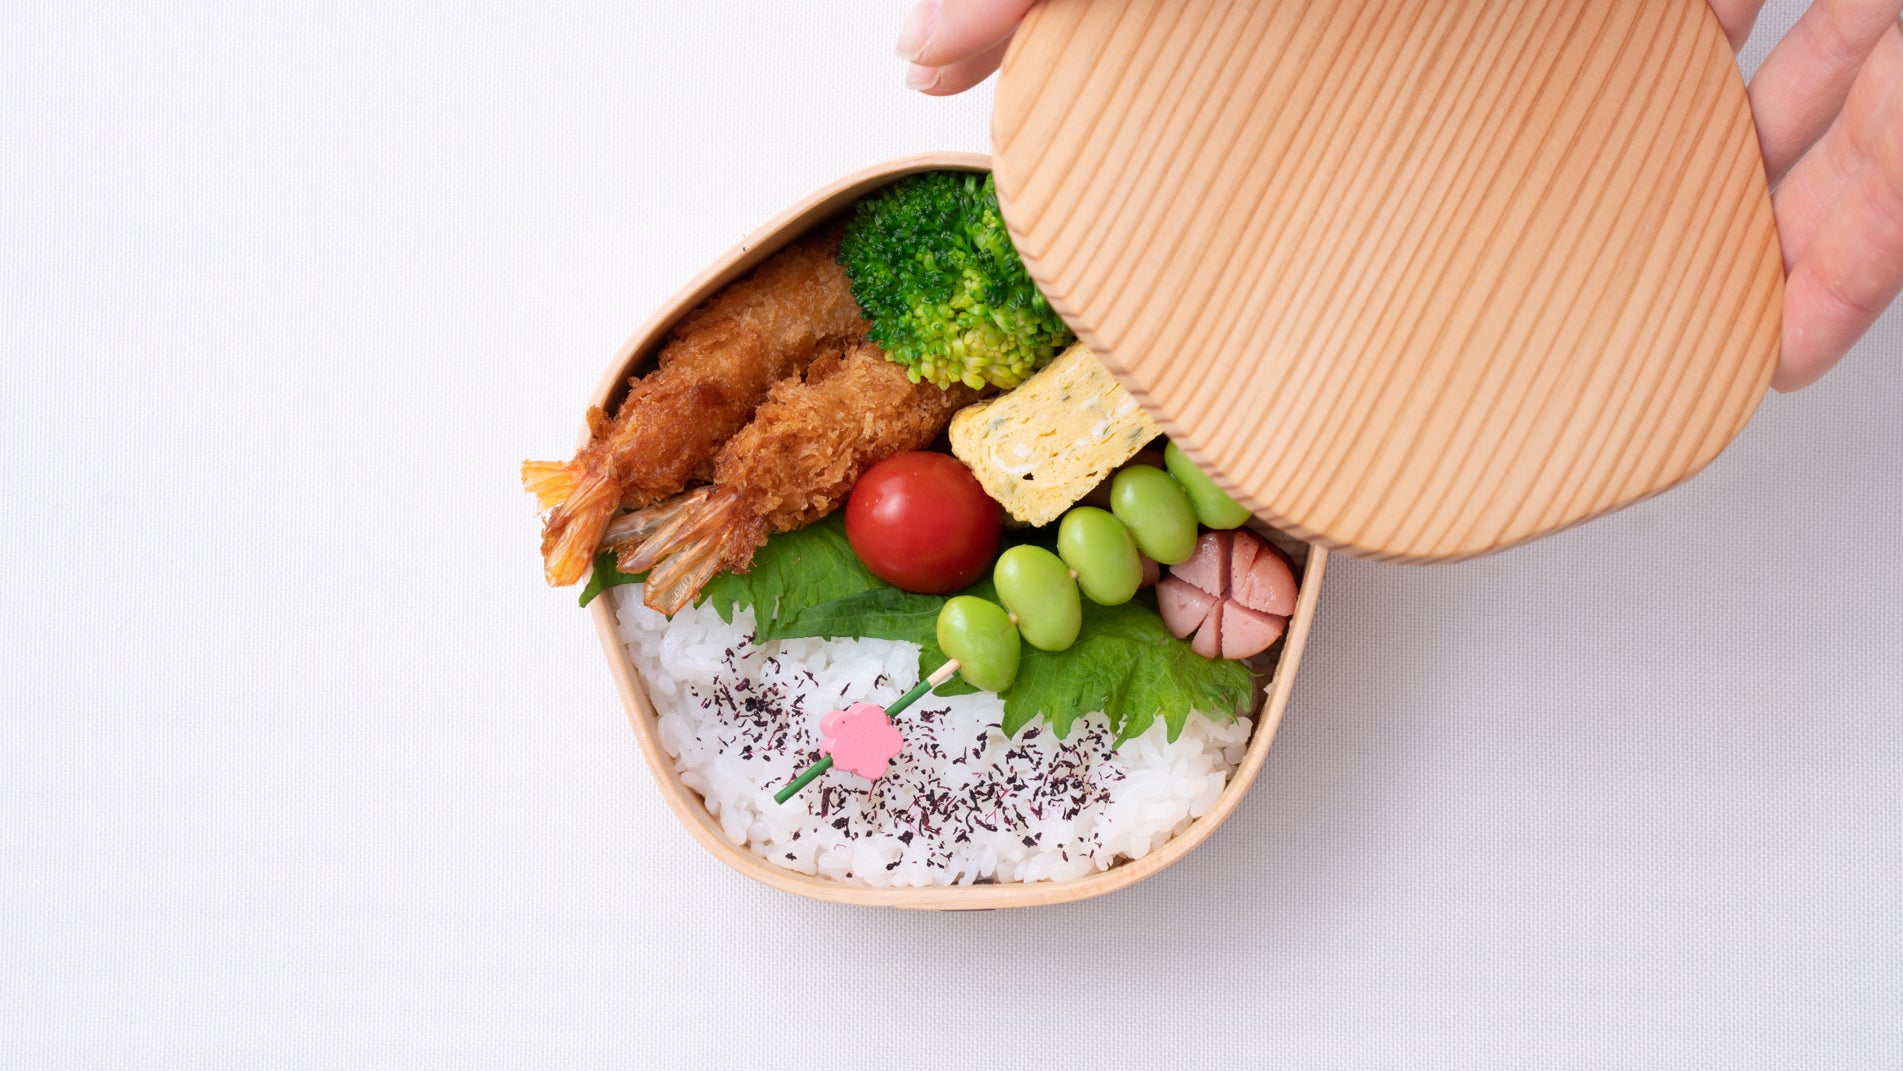 Bento Box: The Traditional Japanese Lunch Box That Is Both Healthy And Too  Pretty To Eat! - NDTV Food